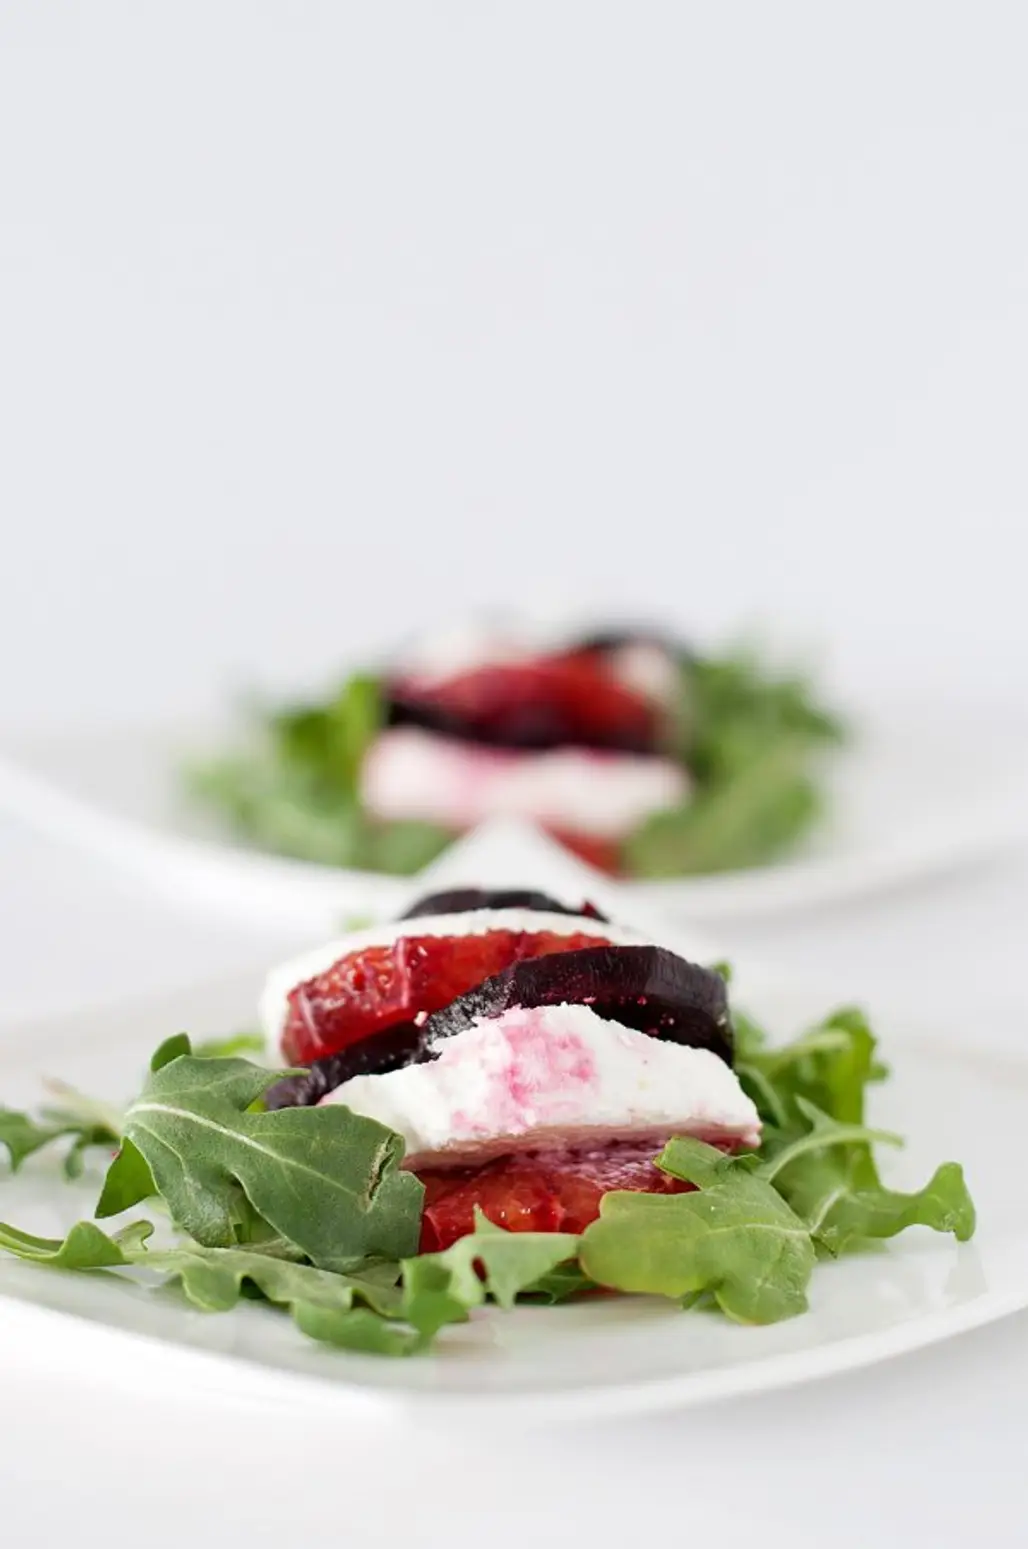 Roasted Beets with Goat Cheese and Arugula